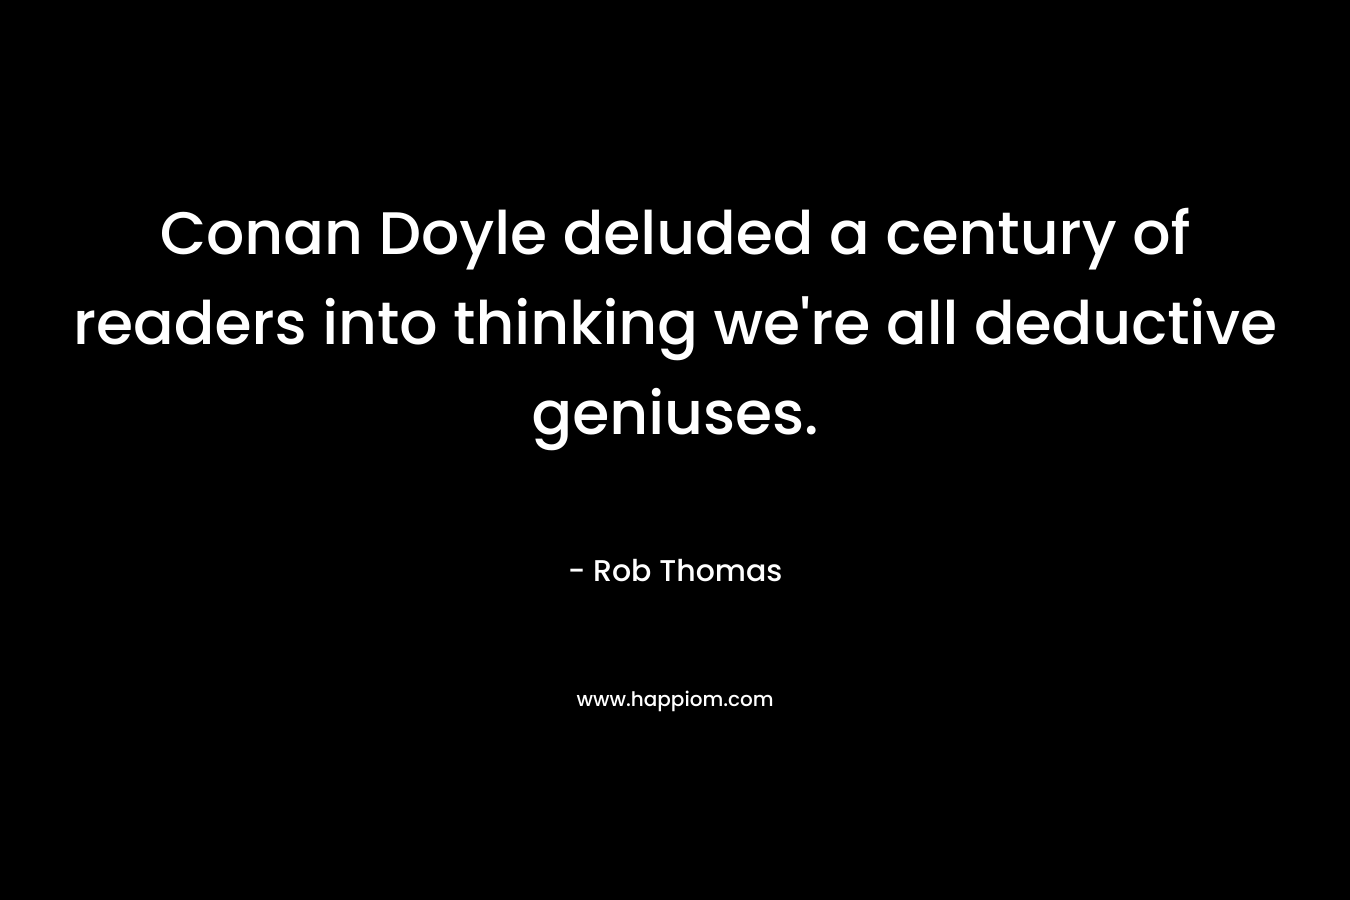 Conan Doyle deluded a century of readers into thinking we’re all deductive geniuses. – Rob Thomas